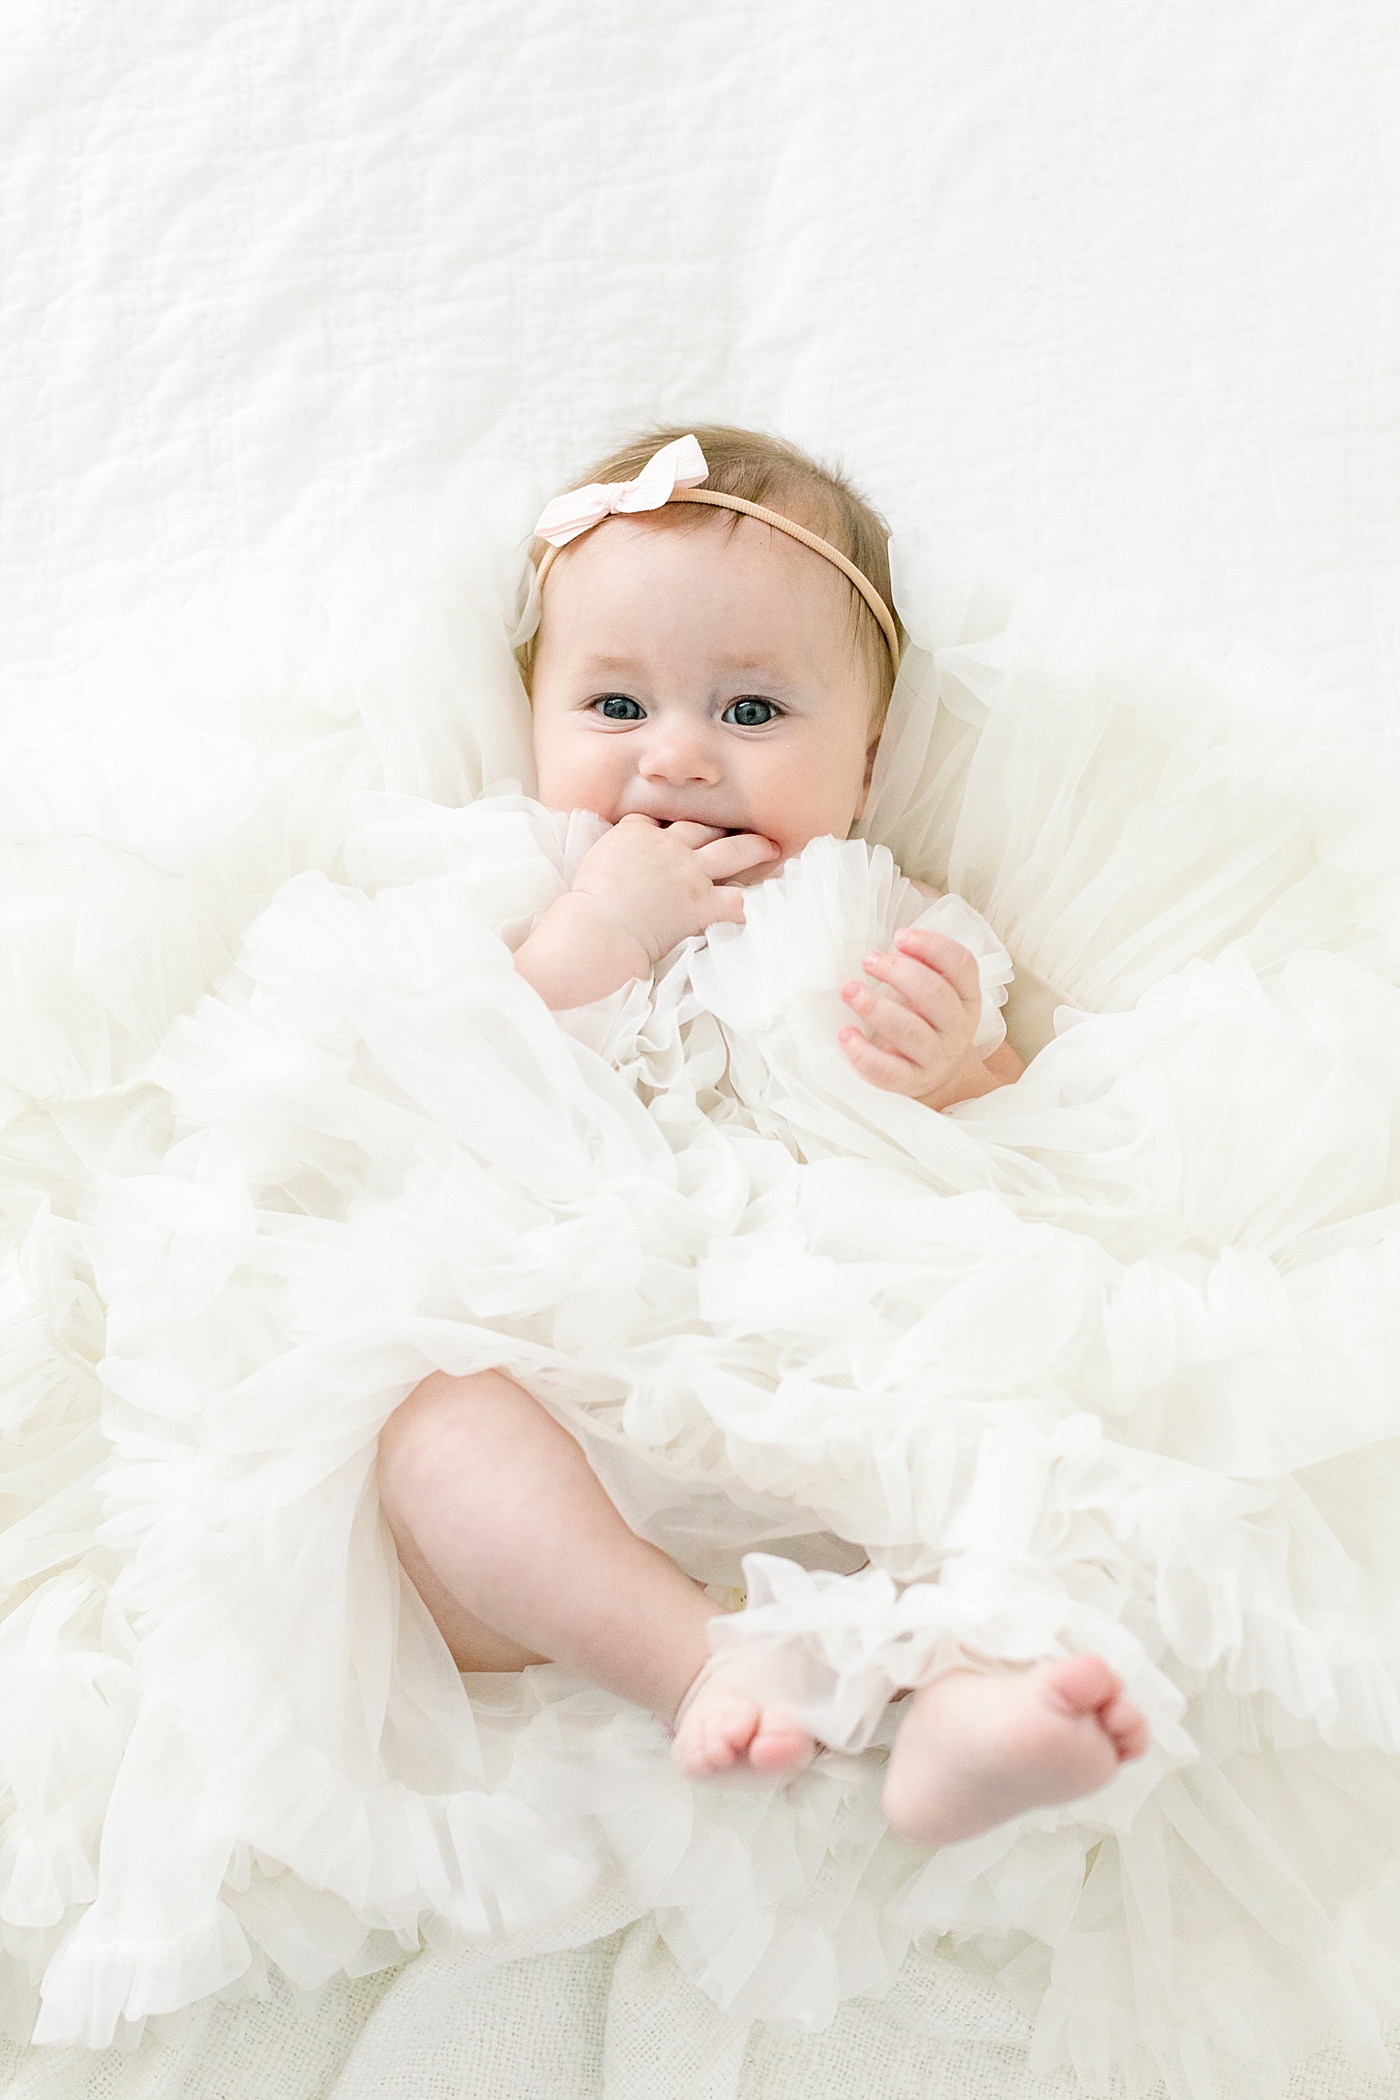 Baby girl in a pile of ruffles | image by Chrissy Winchester